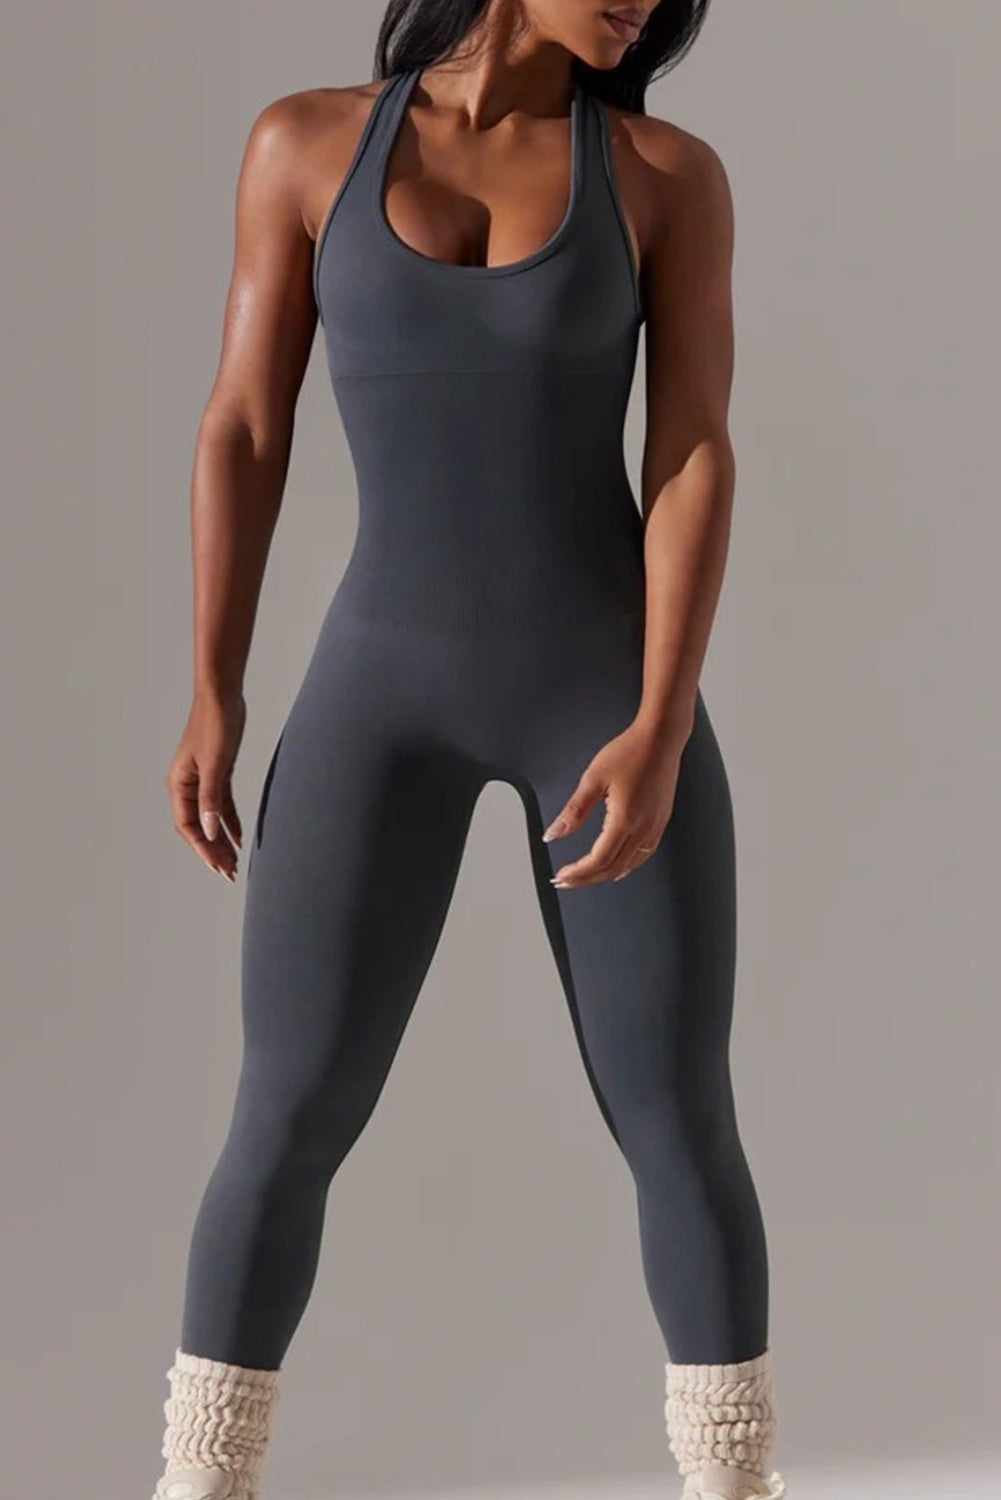  PACK260345-P2011-1, Dark Grey Sleeveless Cut Out Racer Back Yoga Jumpsuit